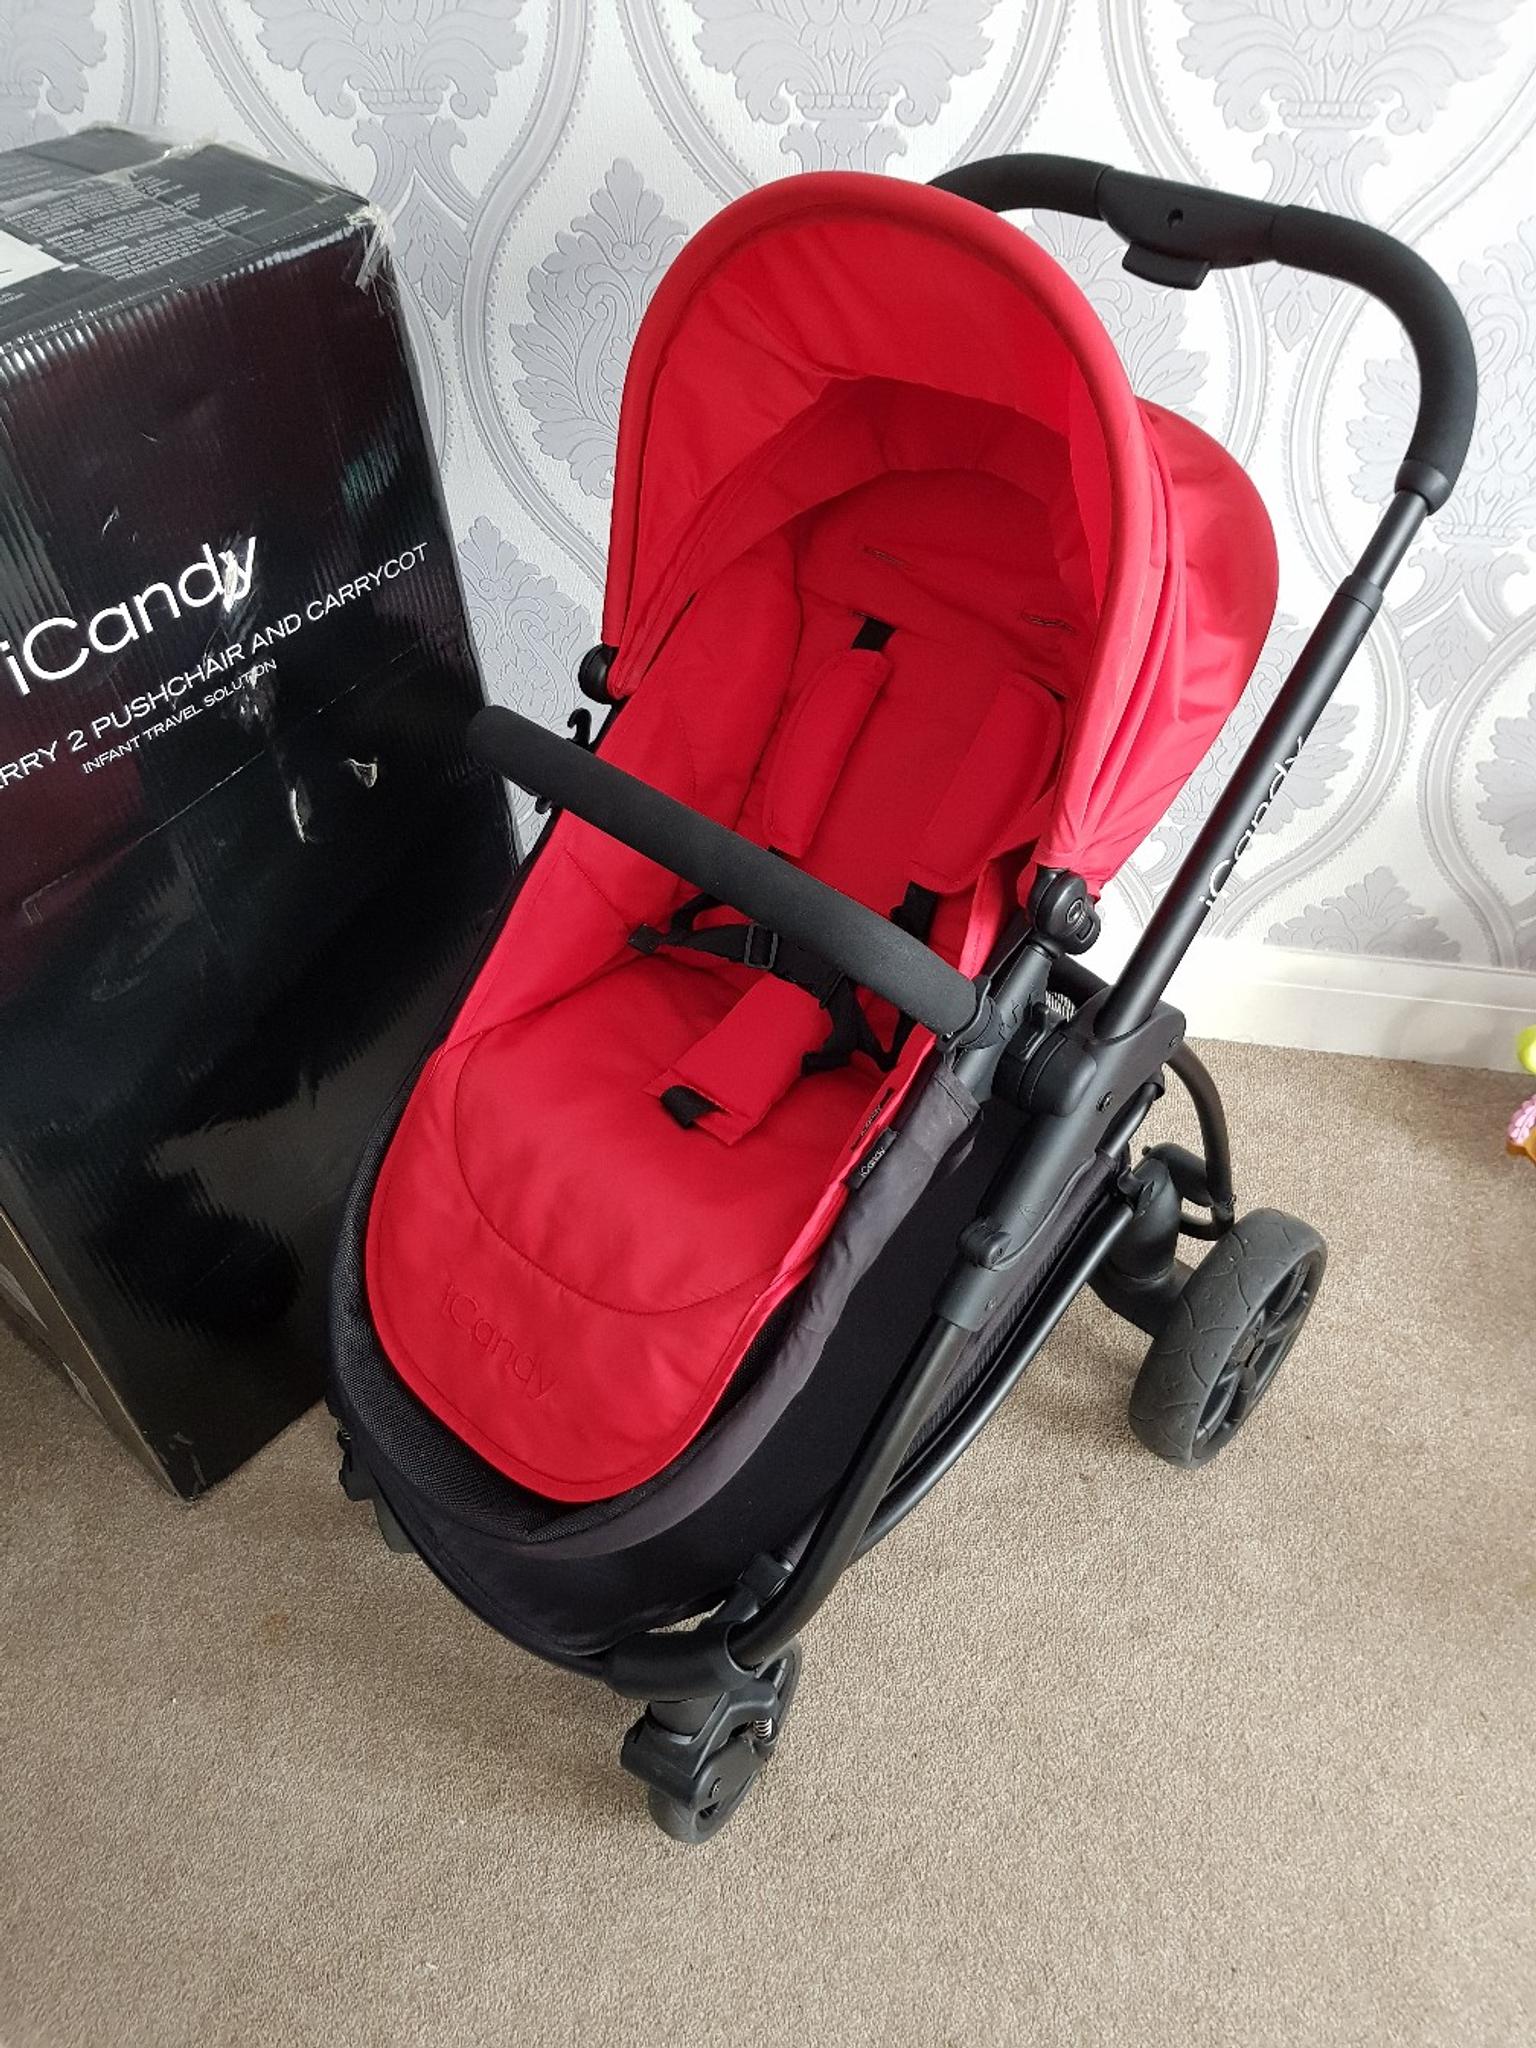 icandy strawberry carrycot